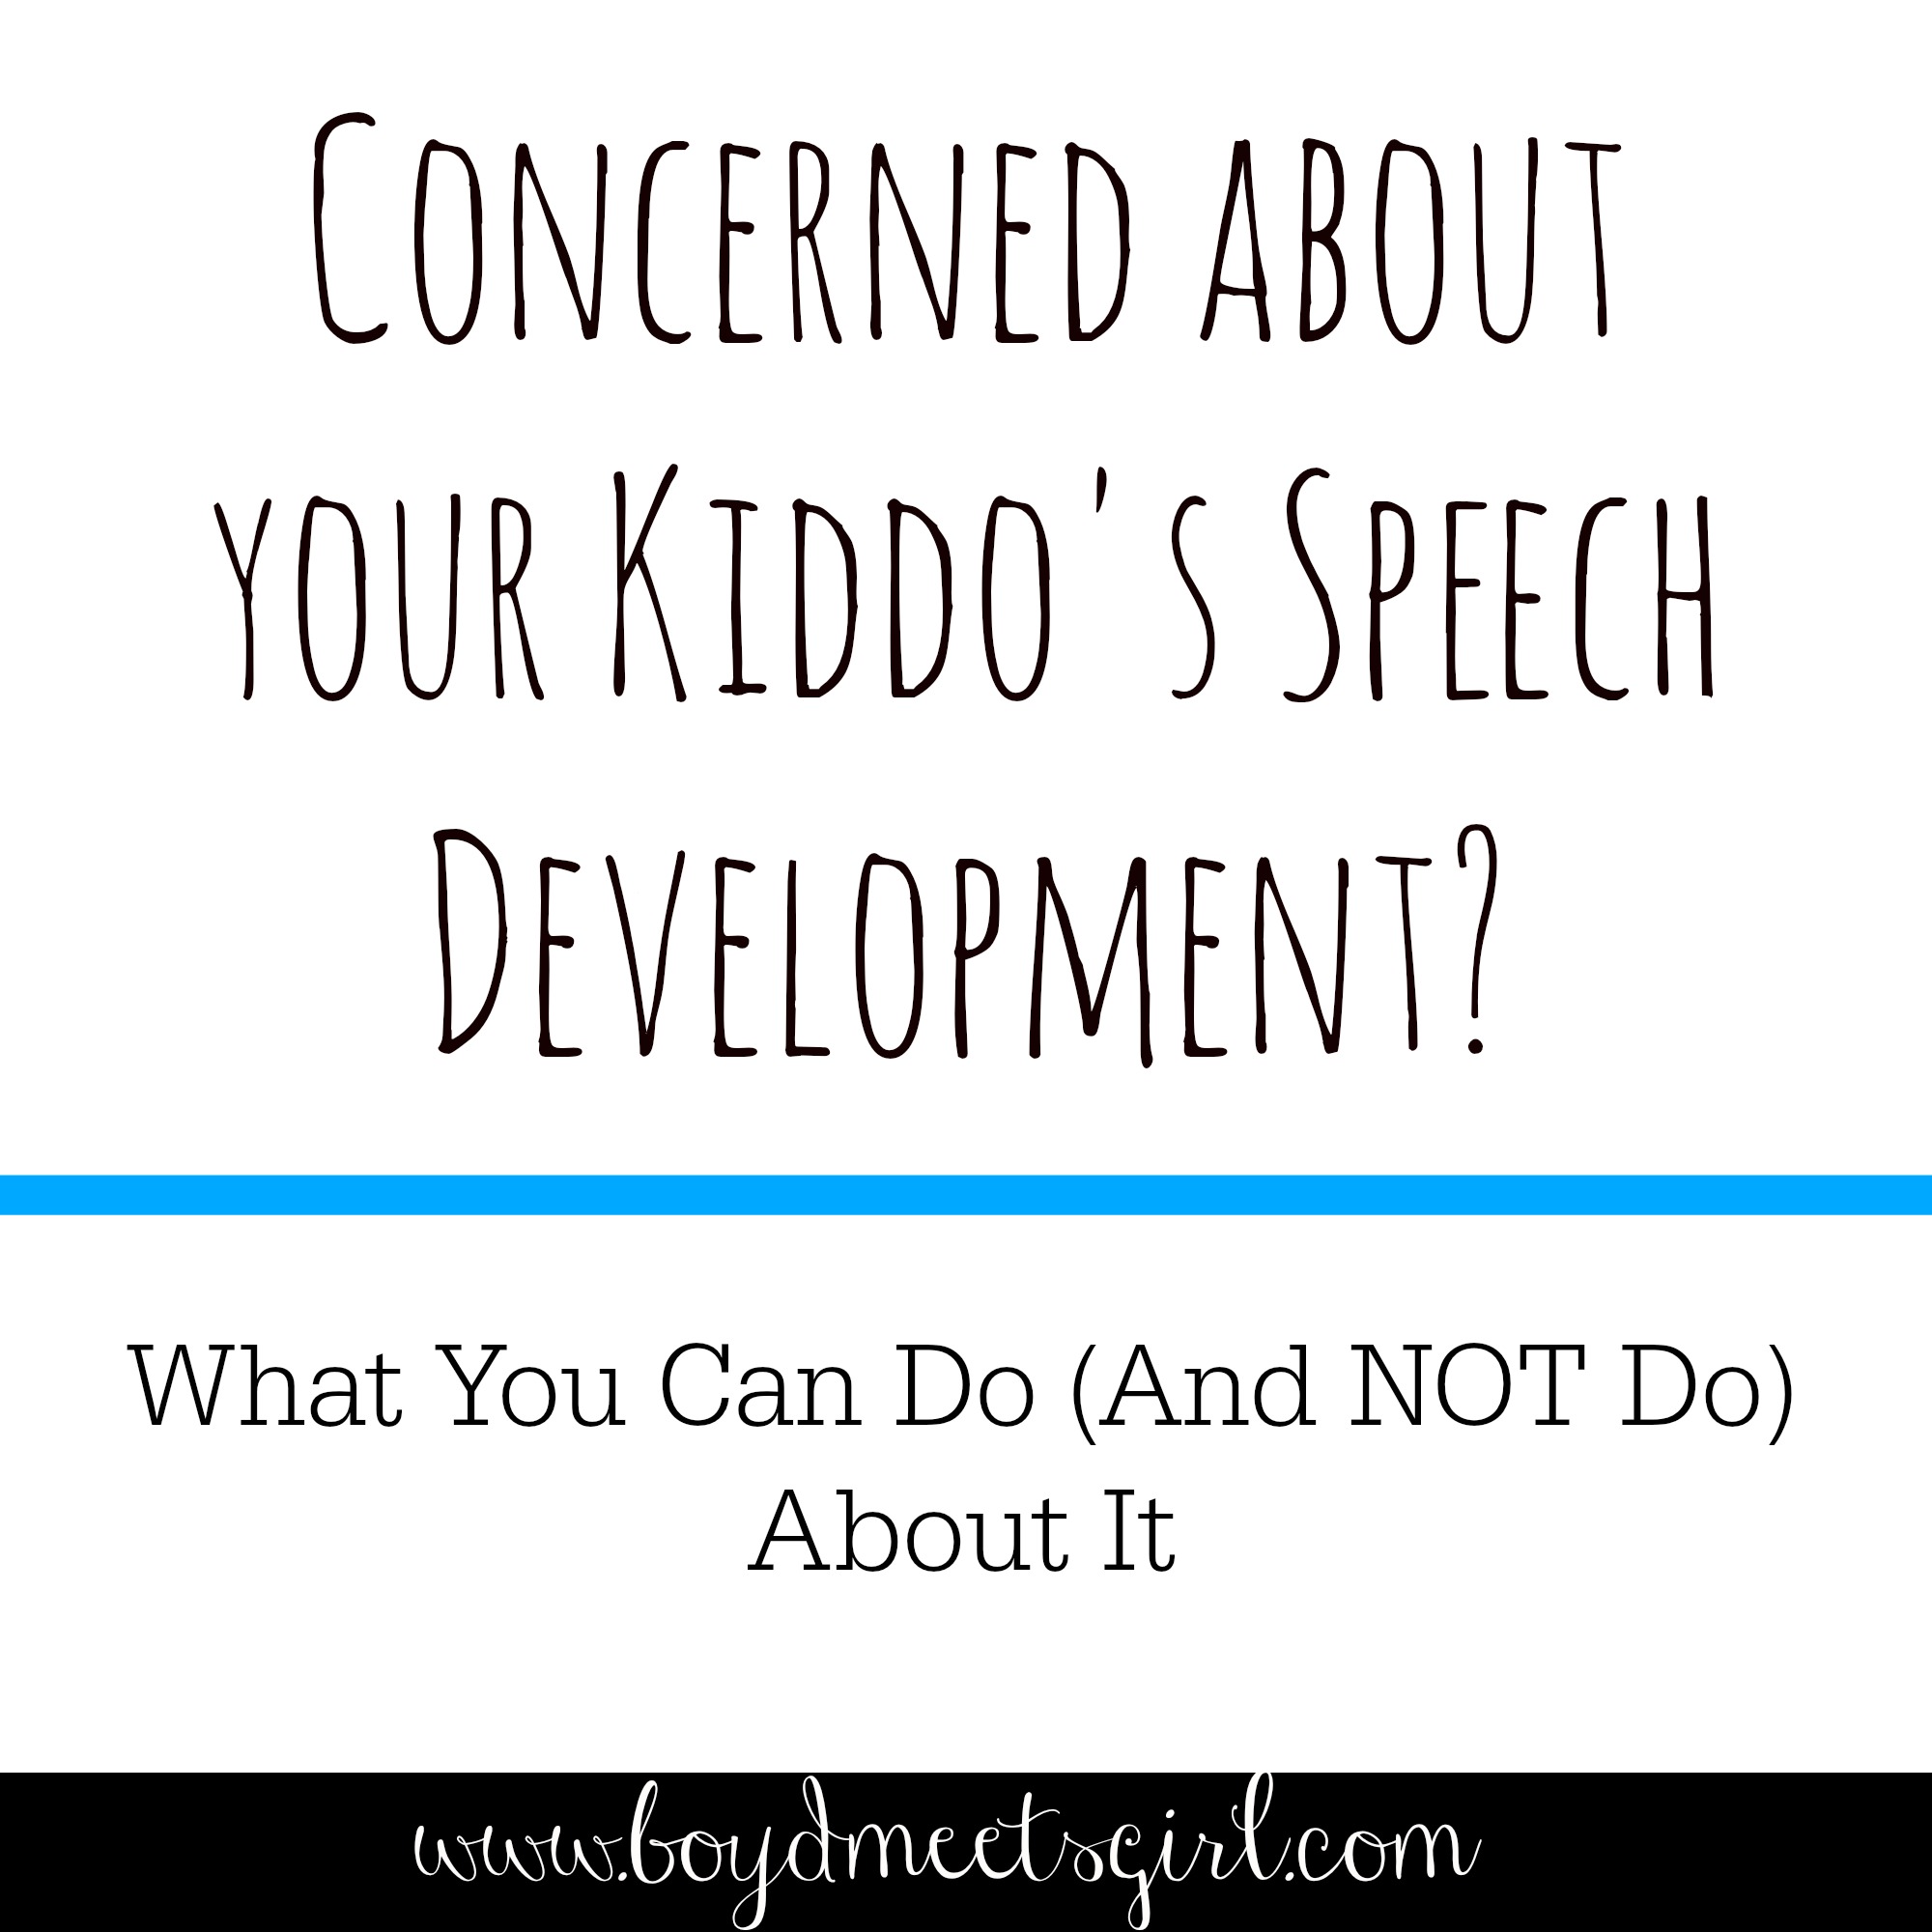 Concerned About Your Kid’s Speech? What To Do (And Not Do)